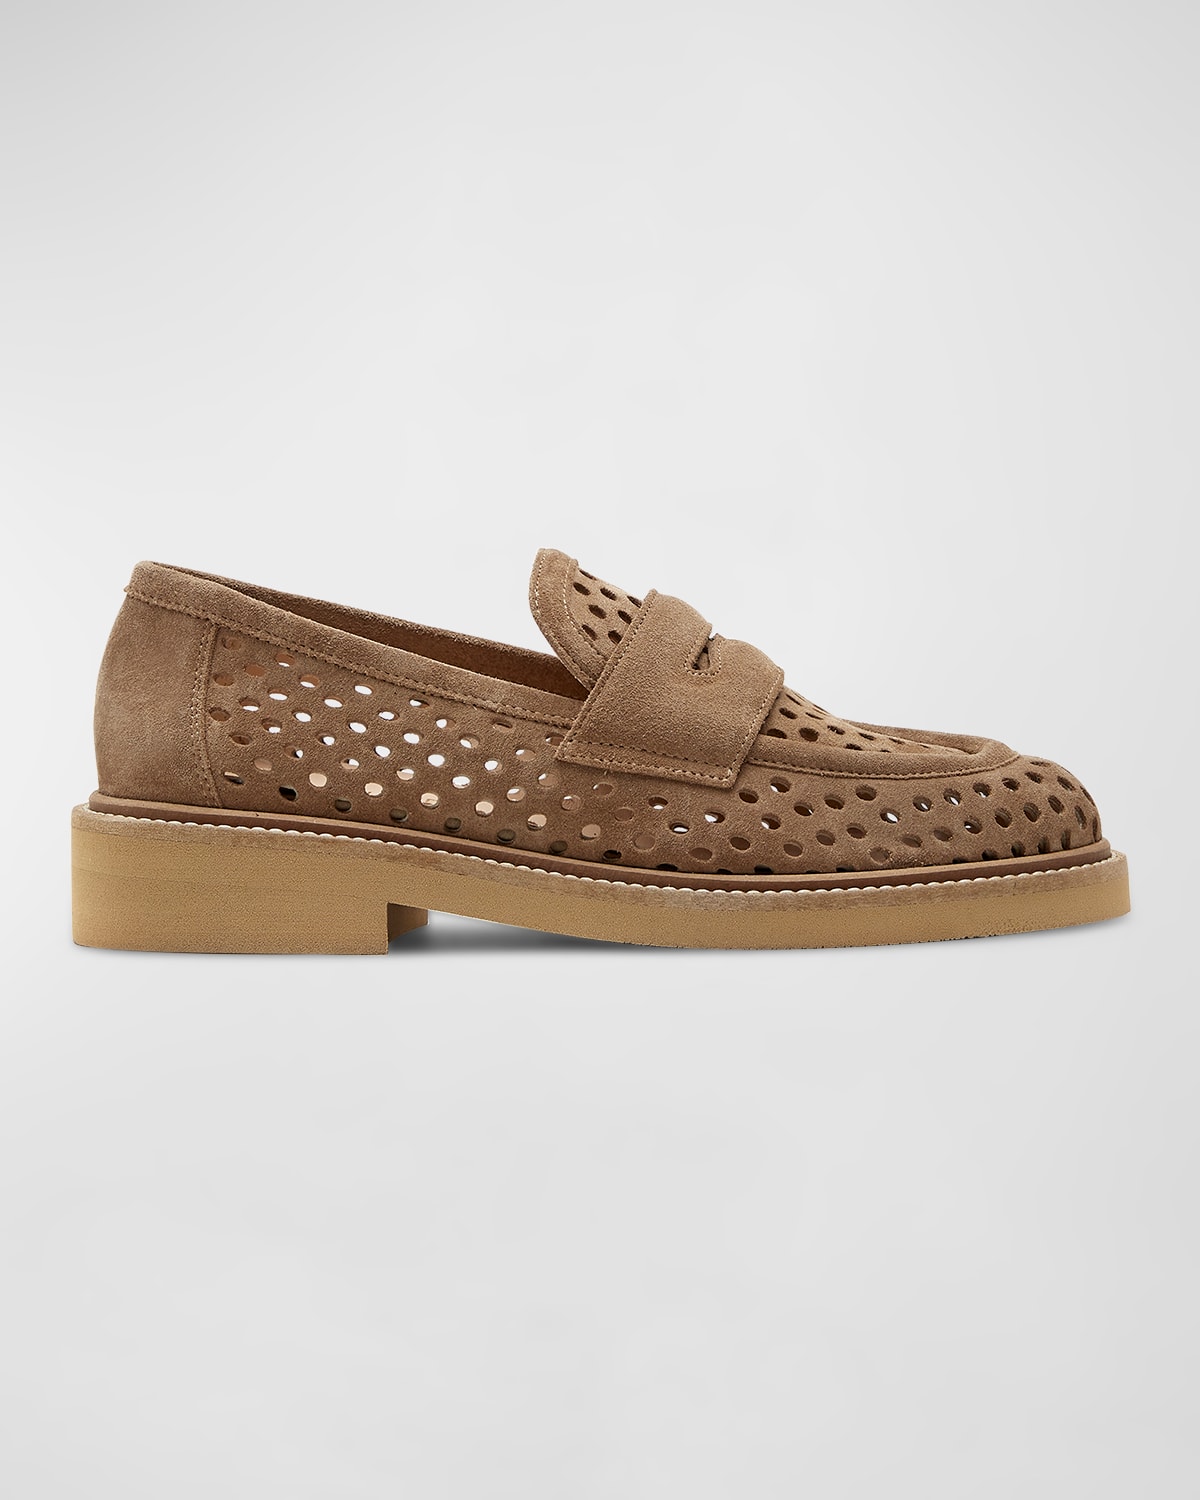 Karter Perforated Suede Penny Loafers